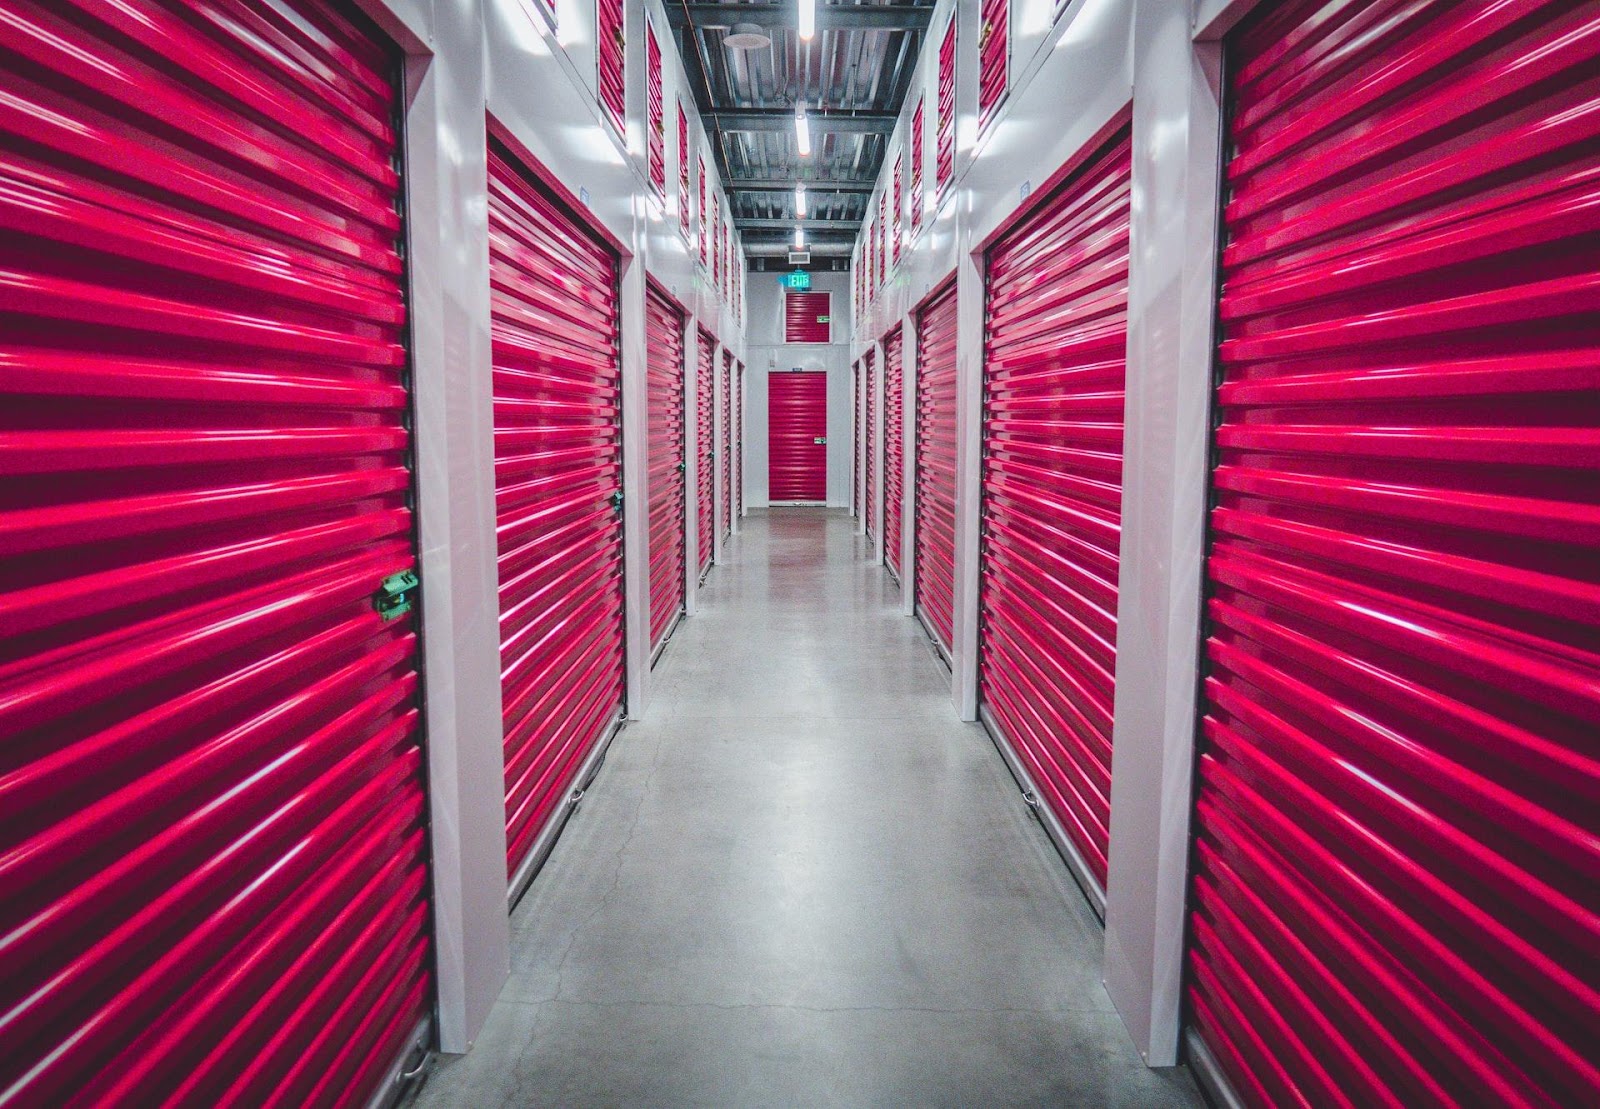 A row of red storage units.